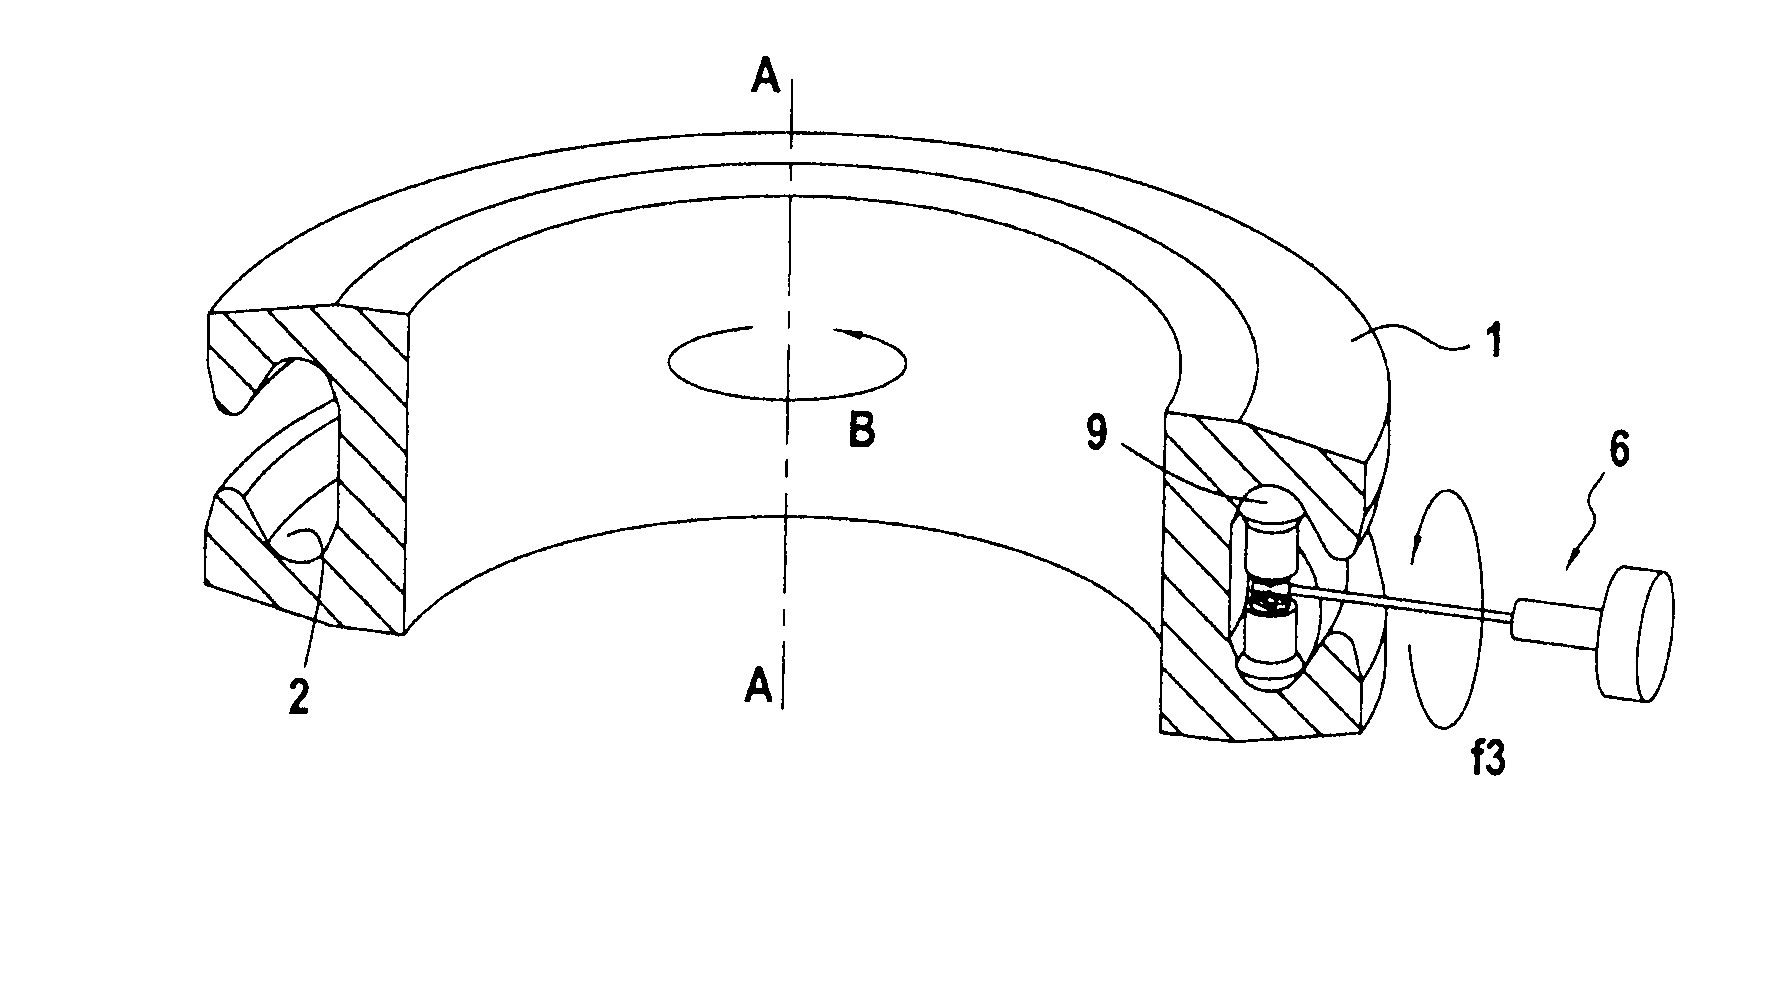 Probe for inspecting the surface of a circumferential slot in a turbojet disk by means of eddy currents